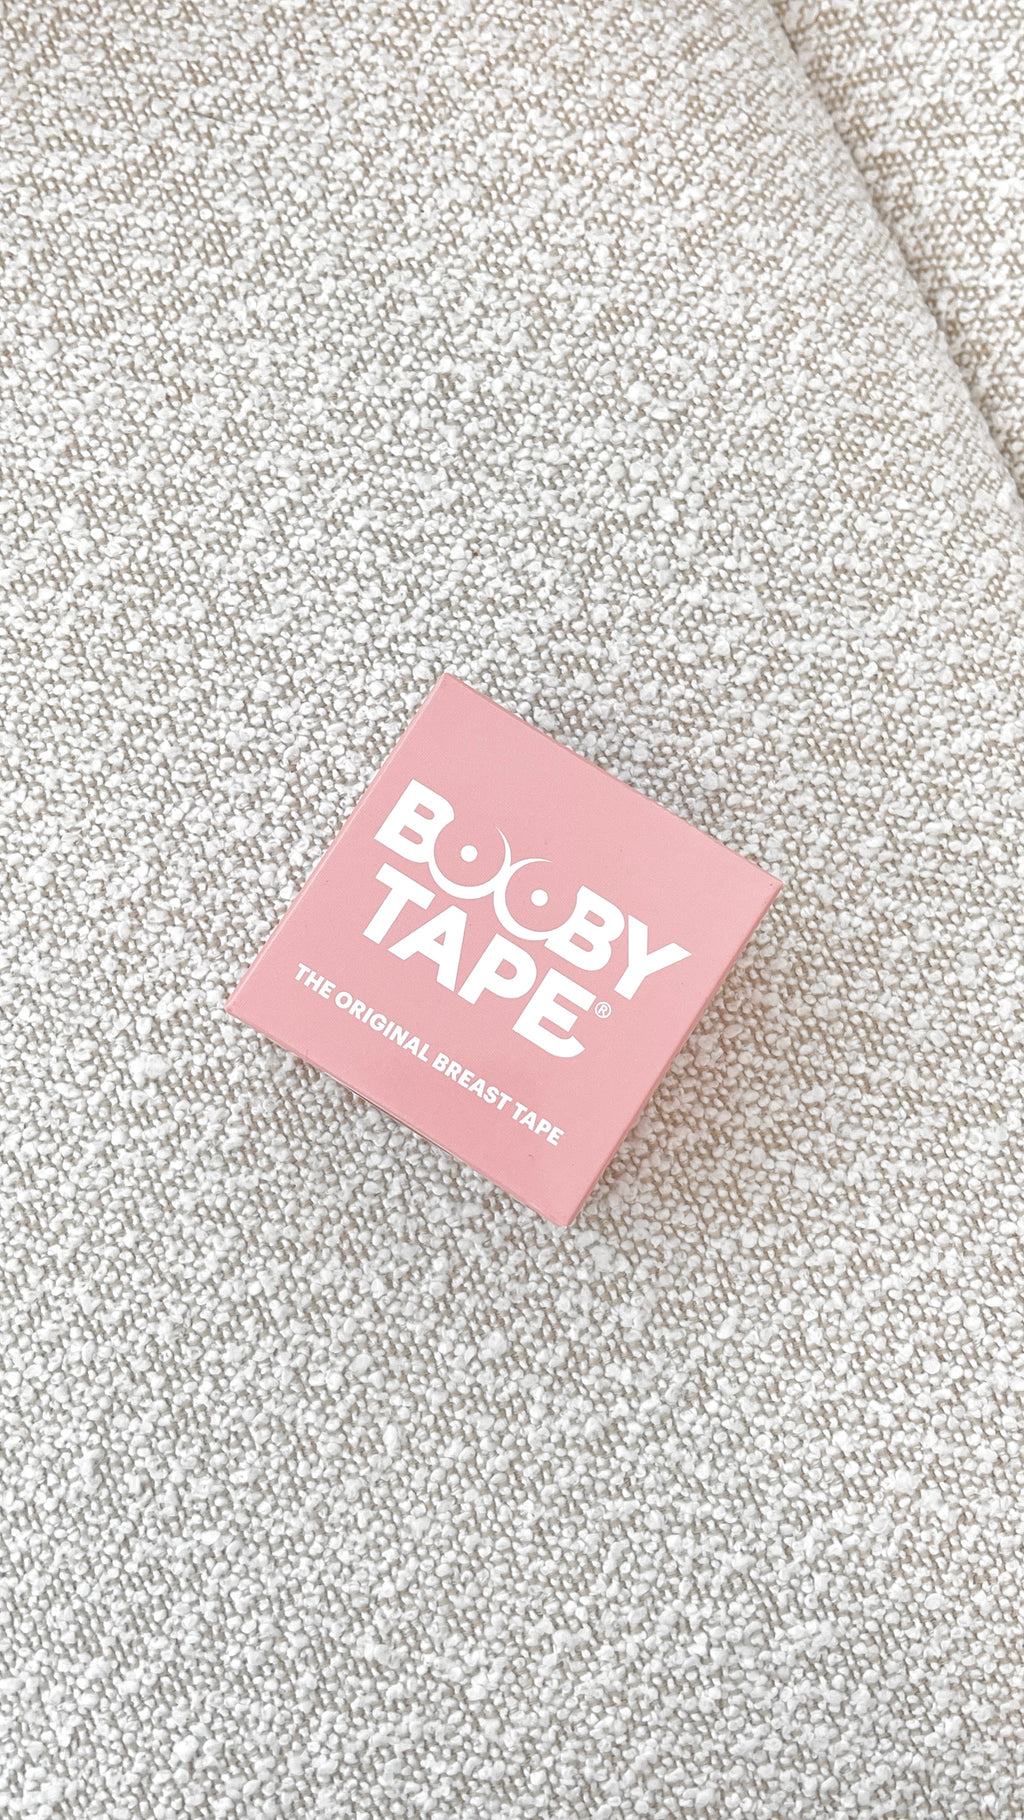 Booby Tape - Brown